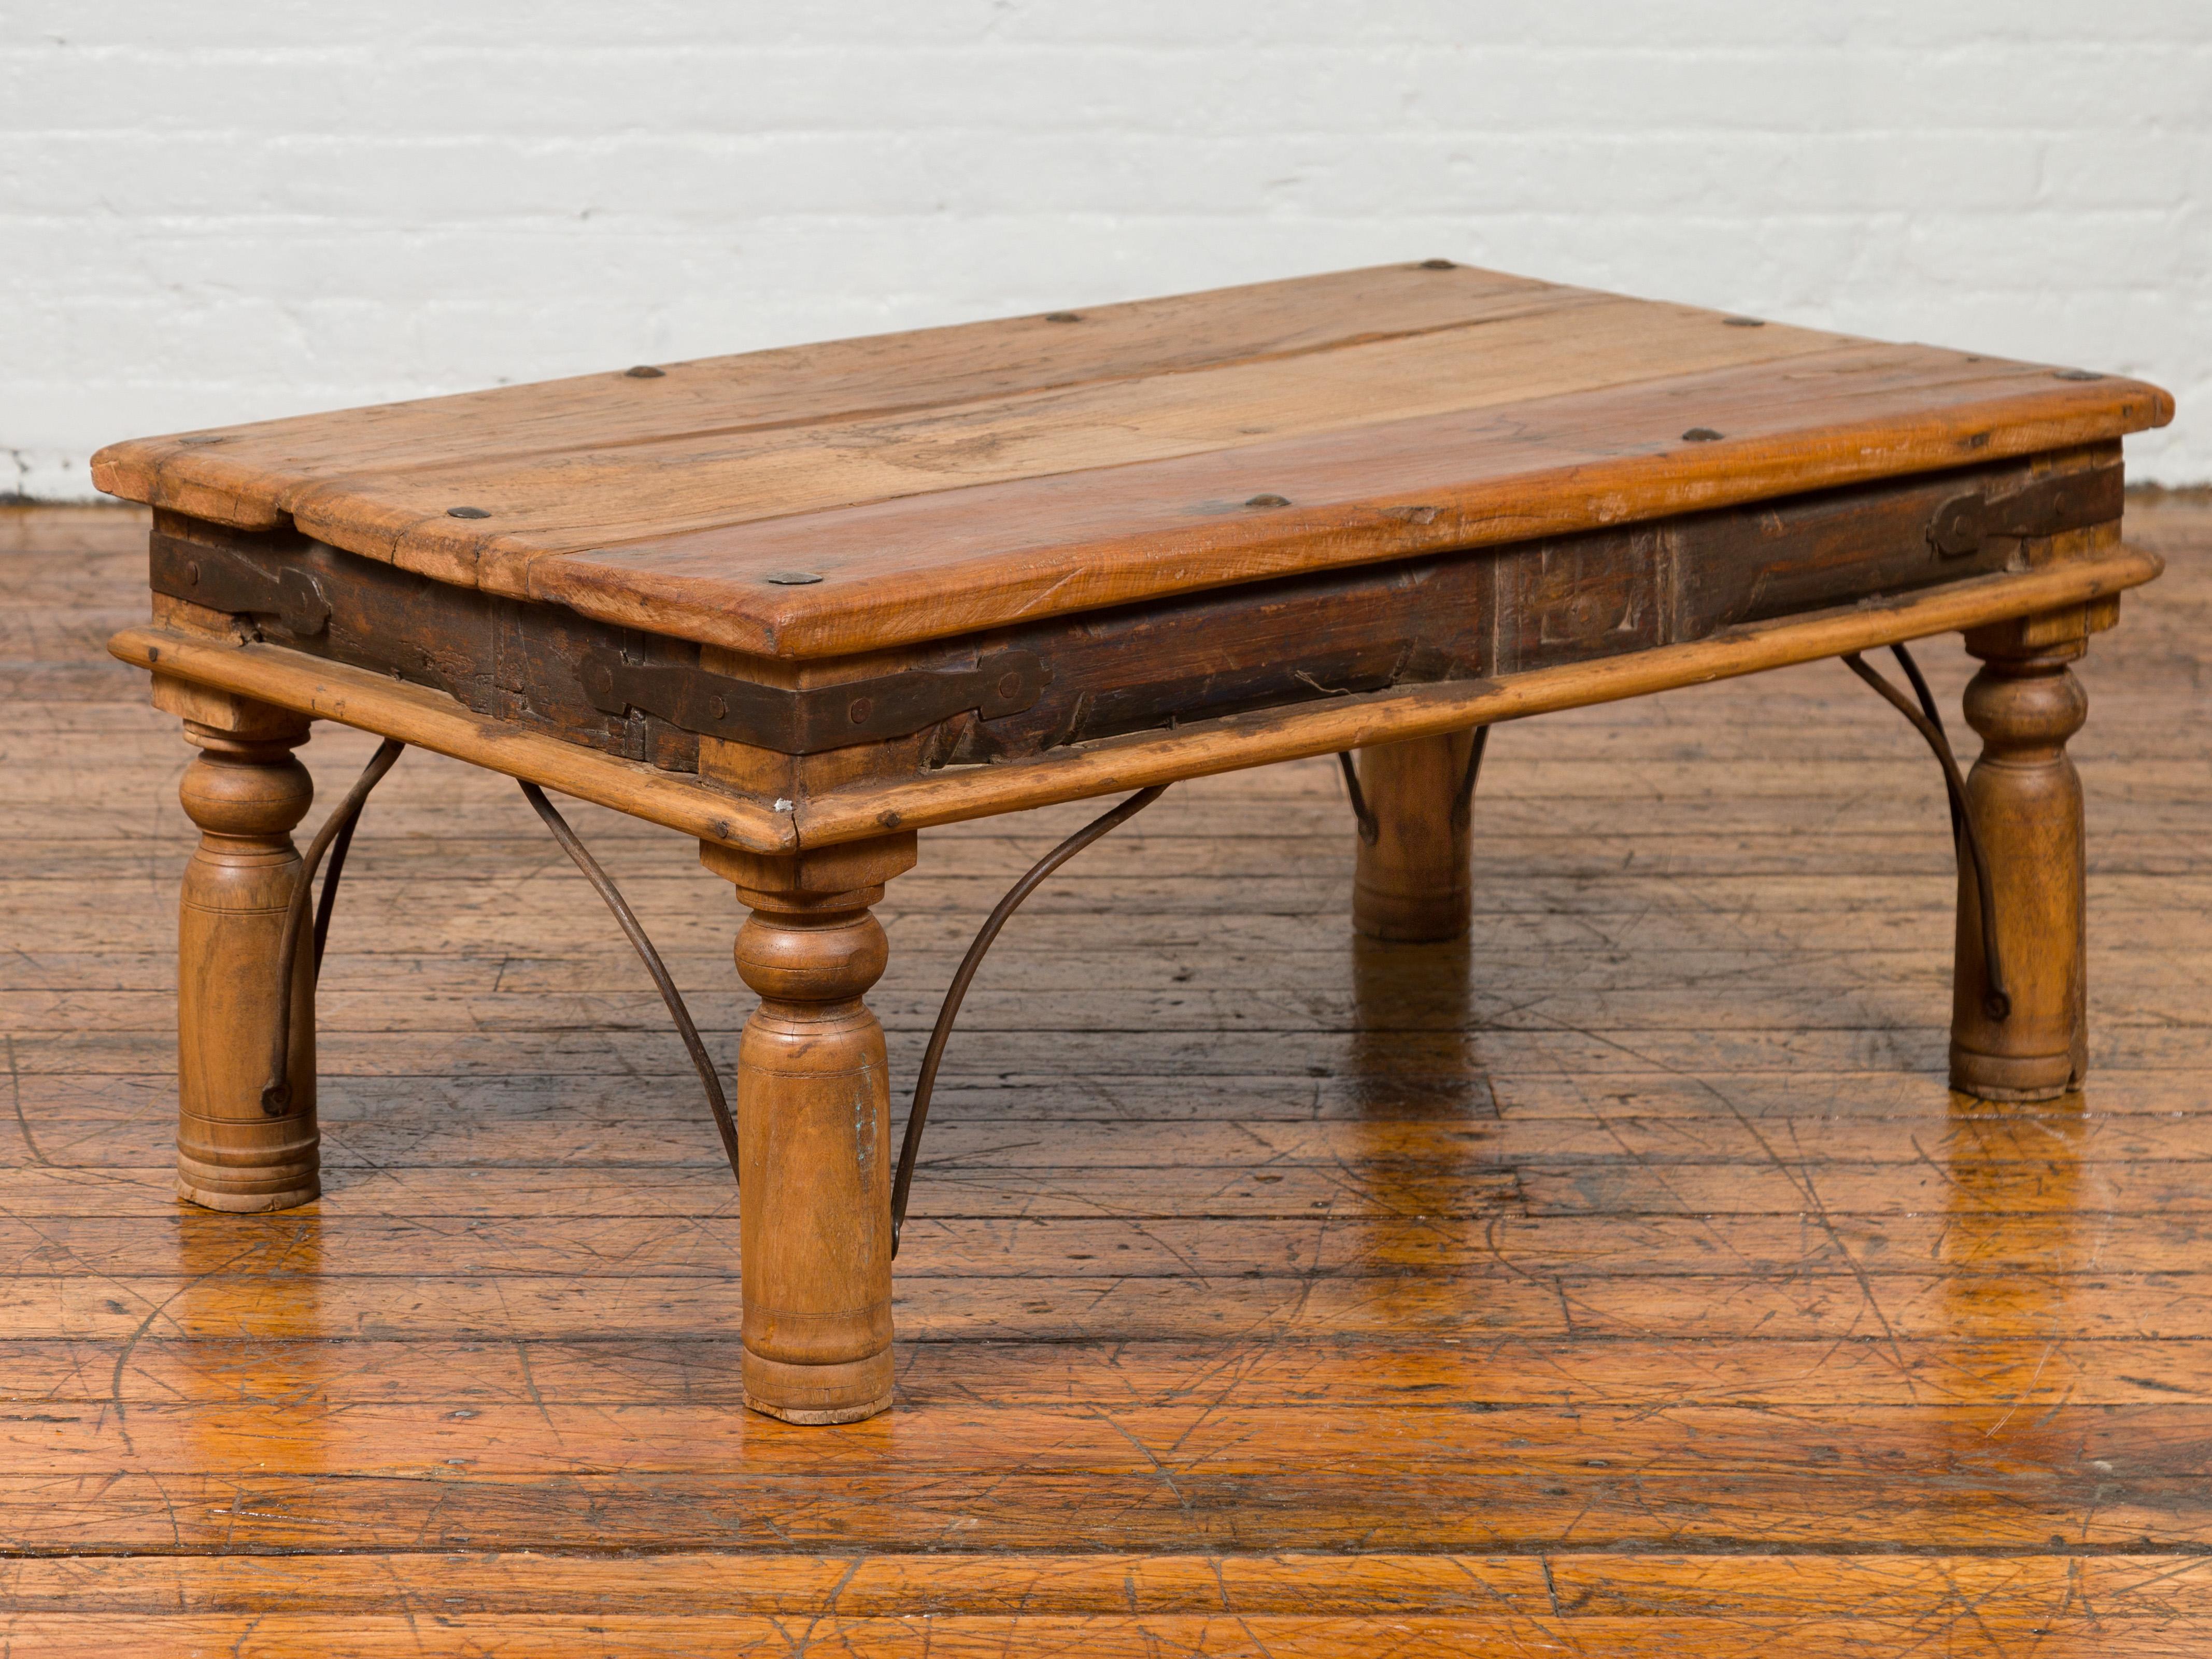 An antique rustic Indian sheesham wood low coffee table from the 19th century with iron nailheads and baluster legs. Crafted in India during the 19th century, this coffee table features a rectangular planked top with iron nailheads, sitting above an